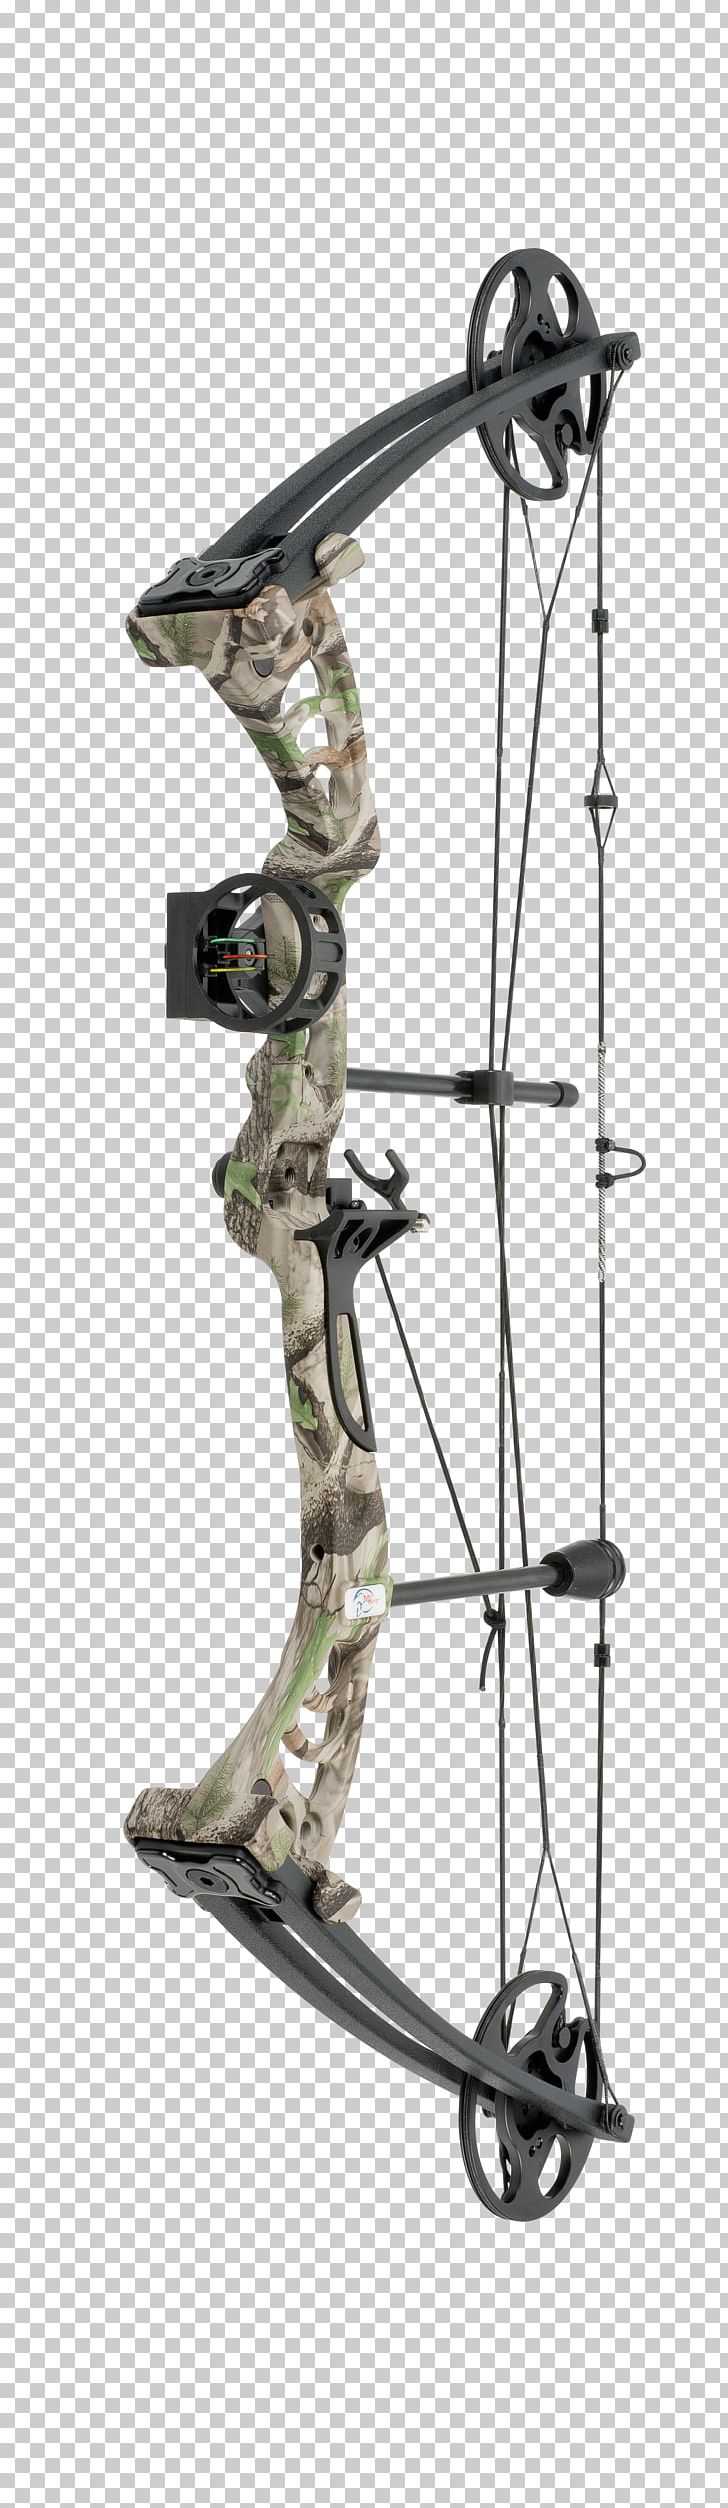 Compound Bows Bow And Arrow Hunting Crossbow PNG, Clipart, Archery, Arrow, Blowgun, Bow, Bow And Arrow Free PNG Download